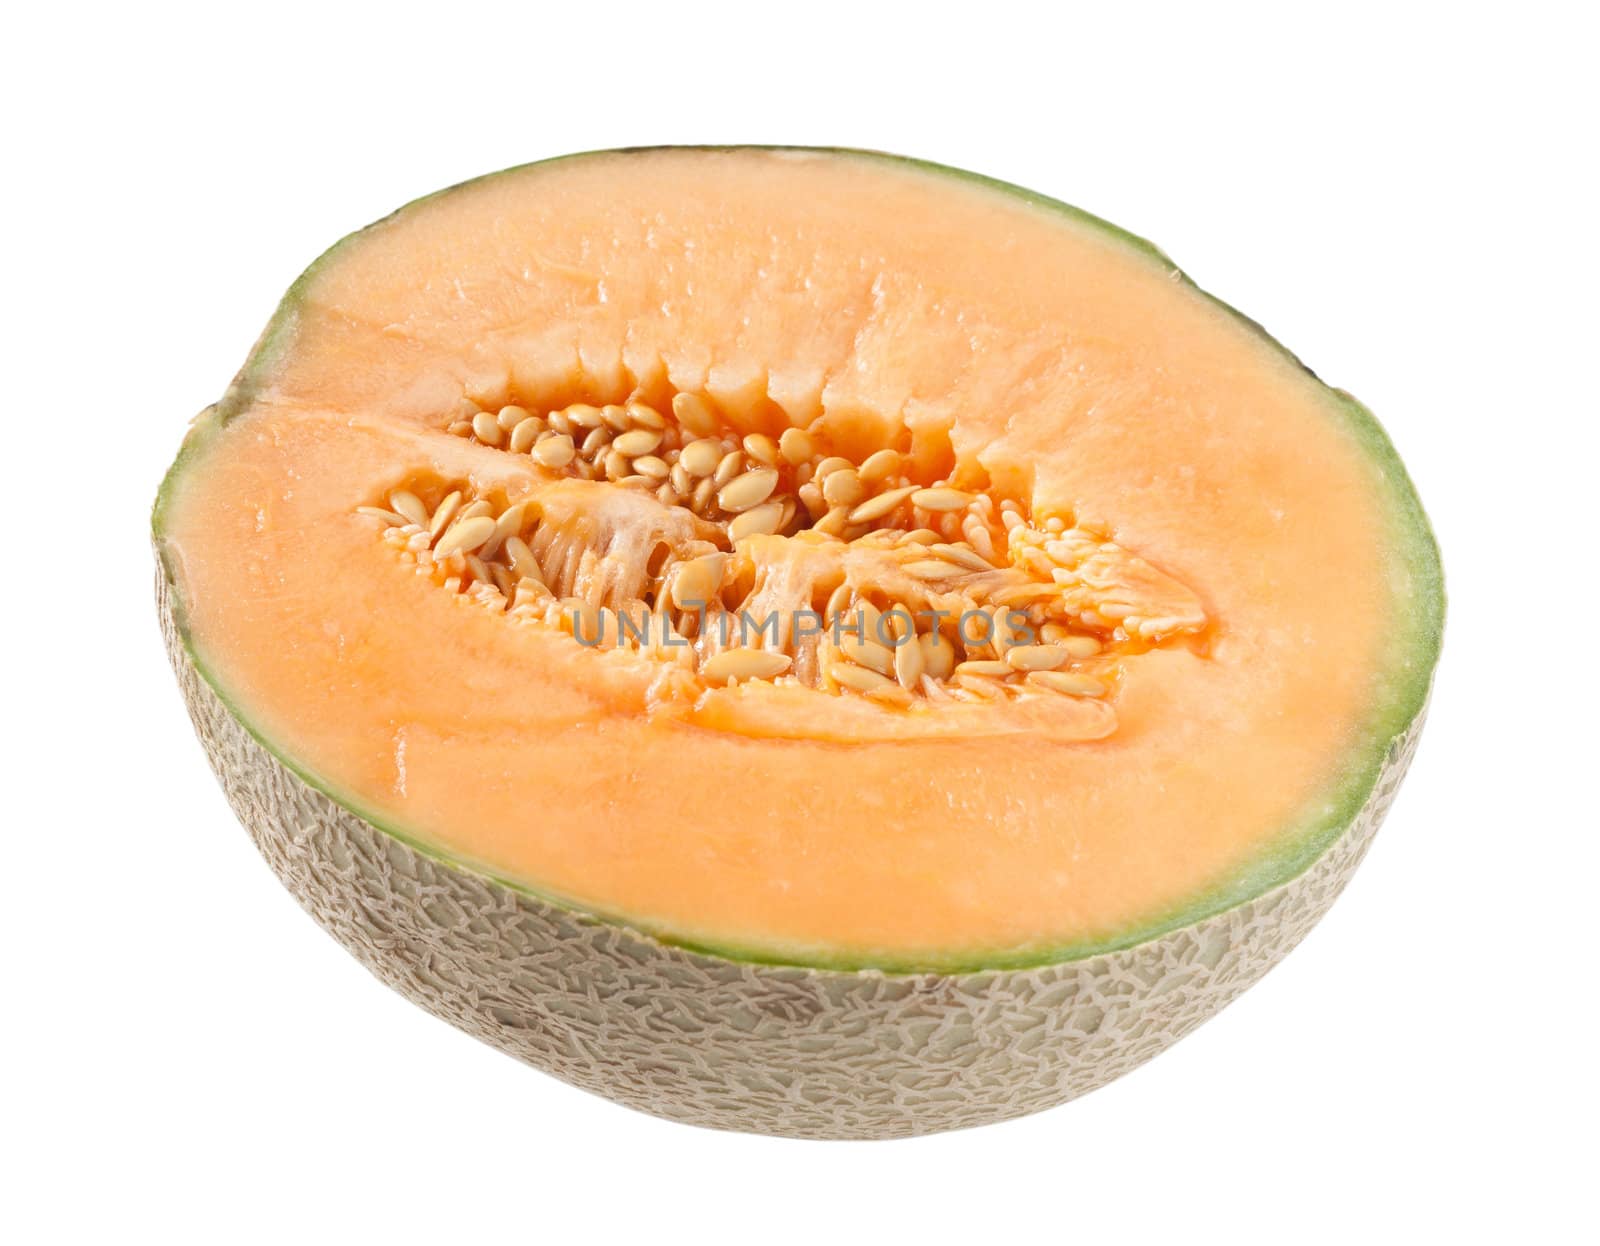 Half a cantaloupe melon isolated on a white background.